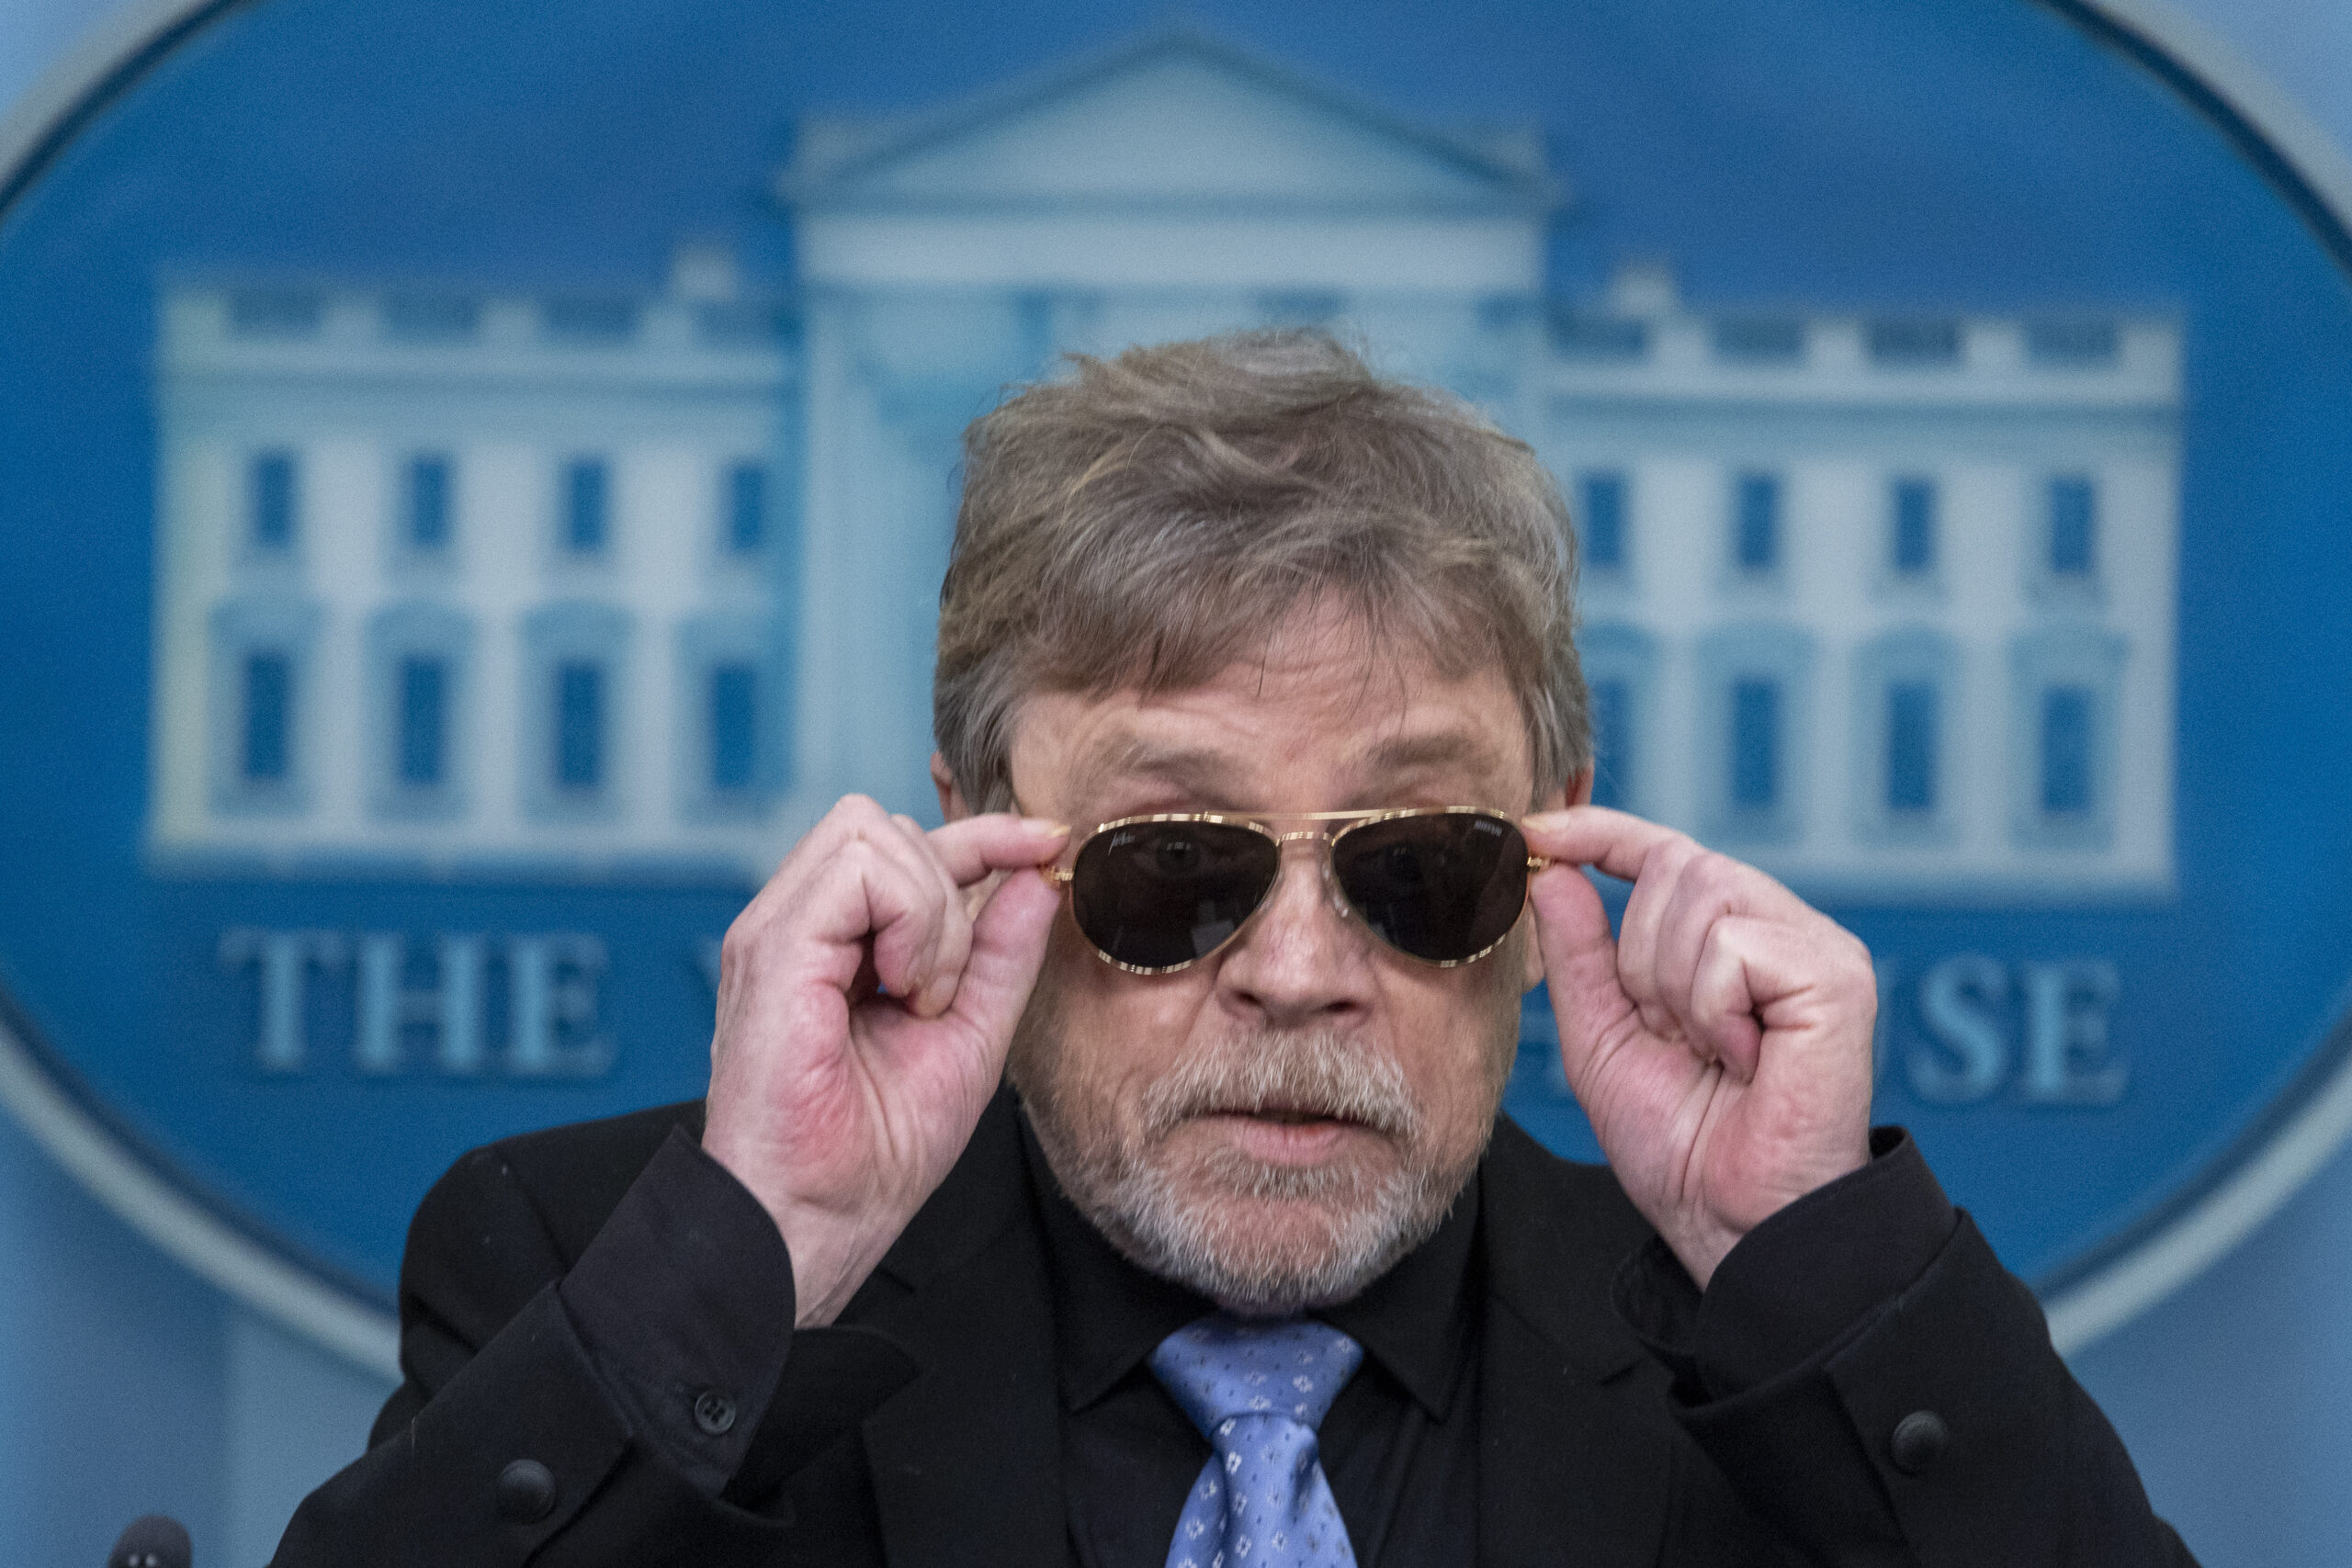 Actor Mark Hamill takes off sunglasses given to him by President Joe Biden, as he joins White House...